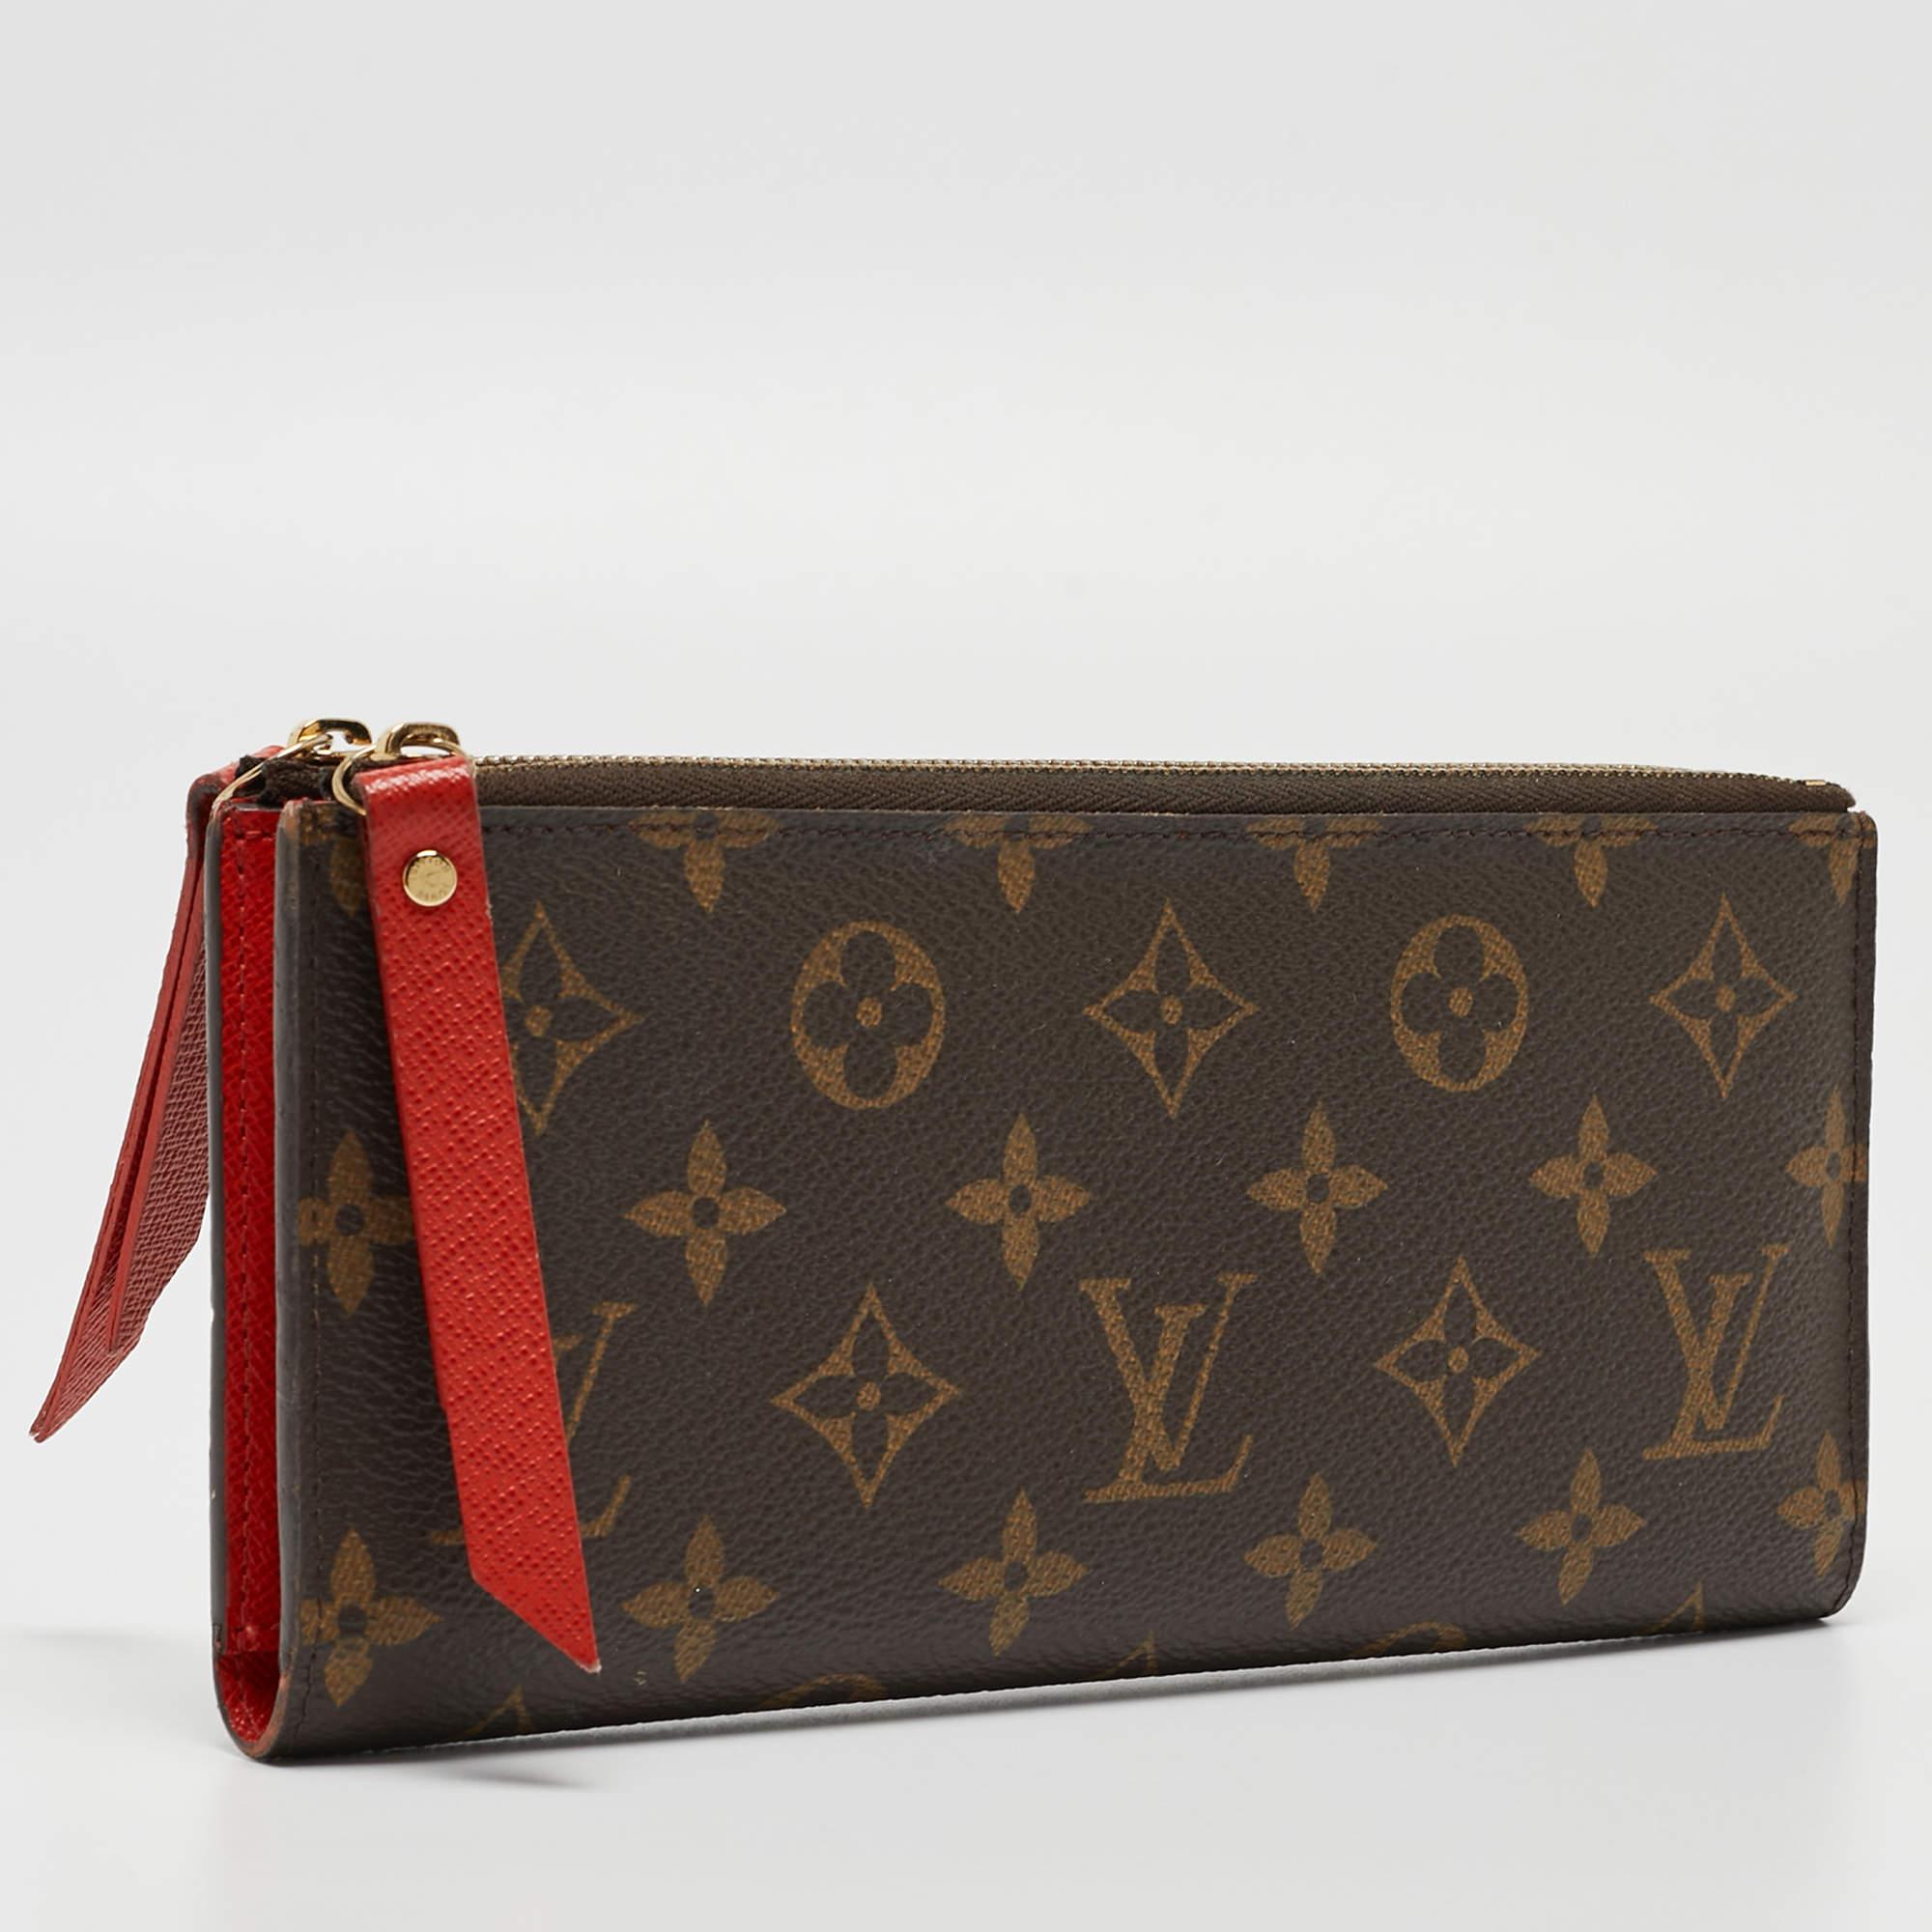 This Louis Vuitton wallet effortlessly combines meticulous construction with ageless style, making it a symbol of refined taste. Elevate your accessory collection with this piece.

